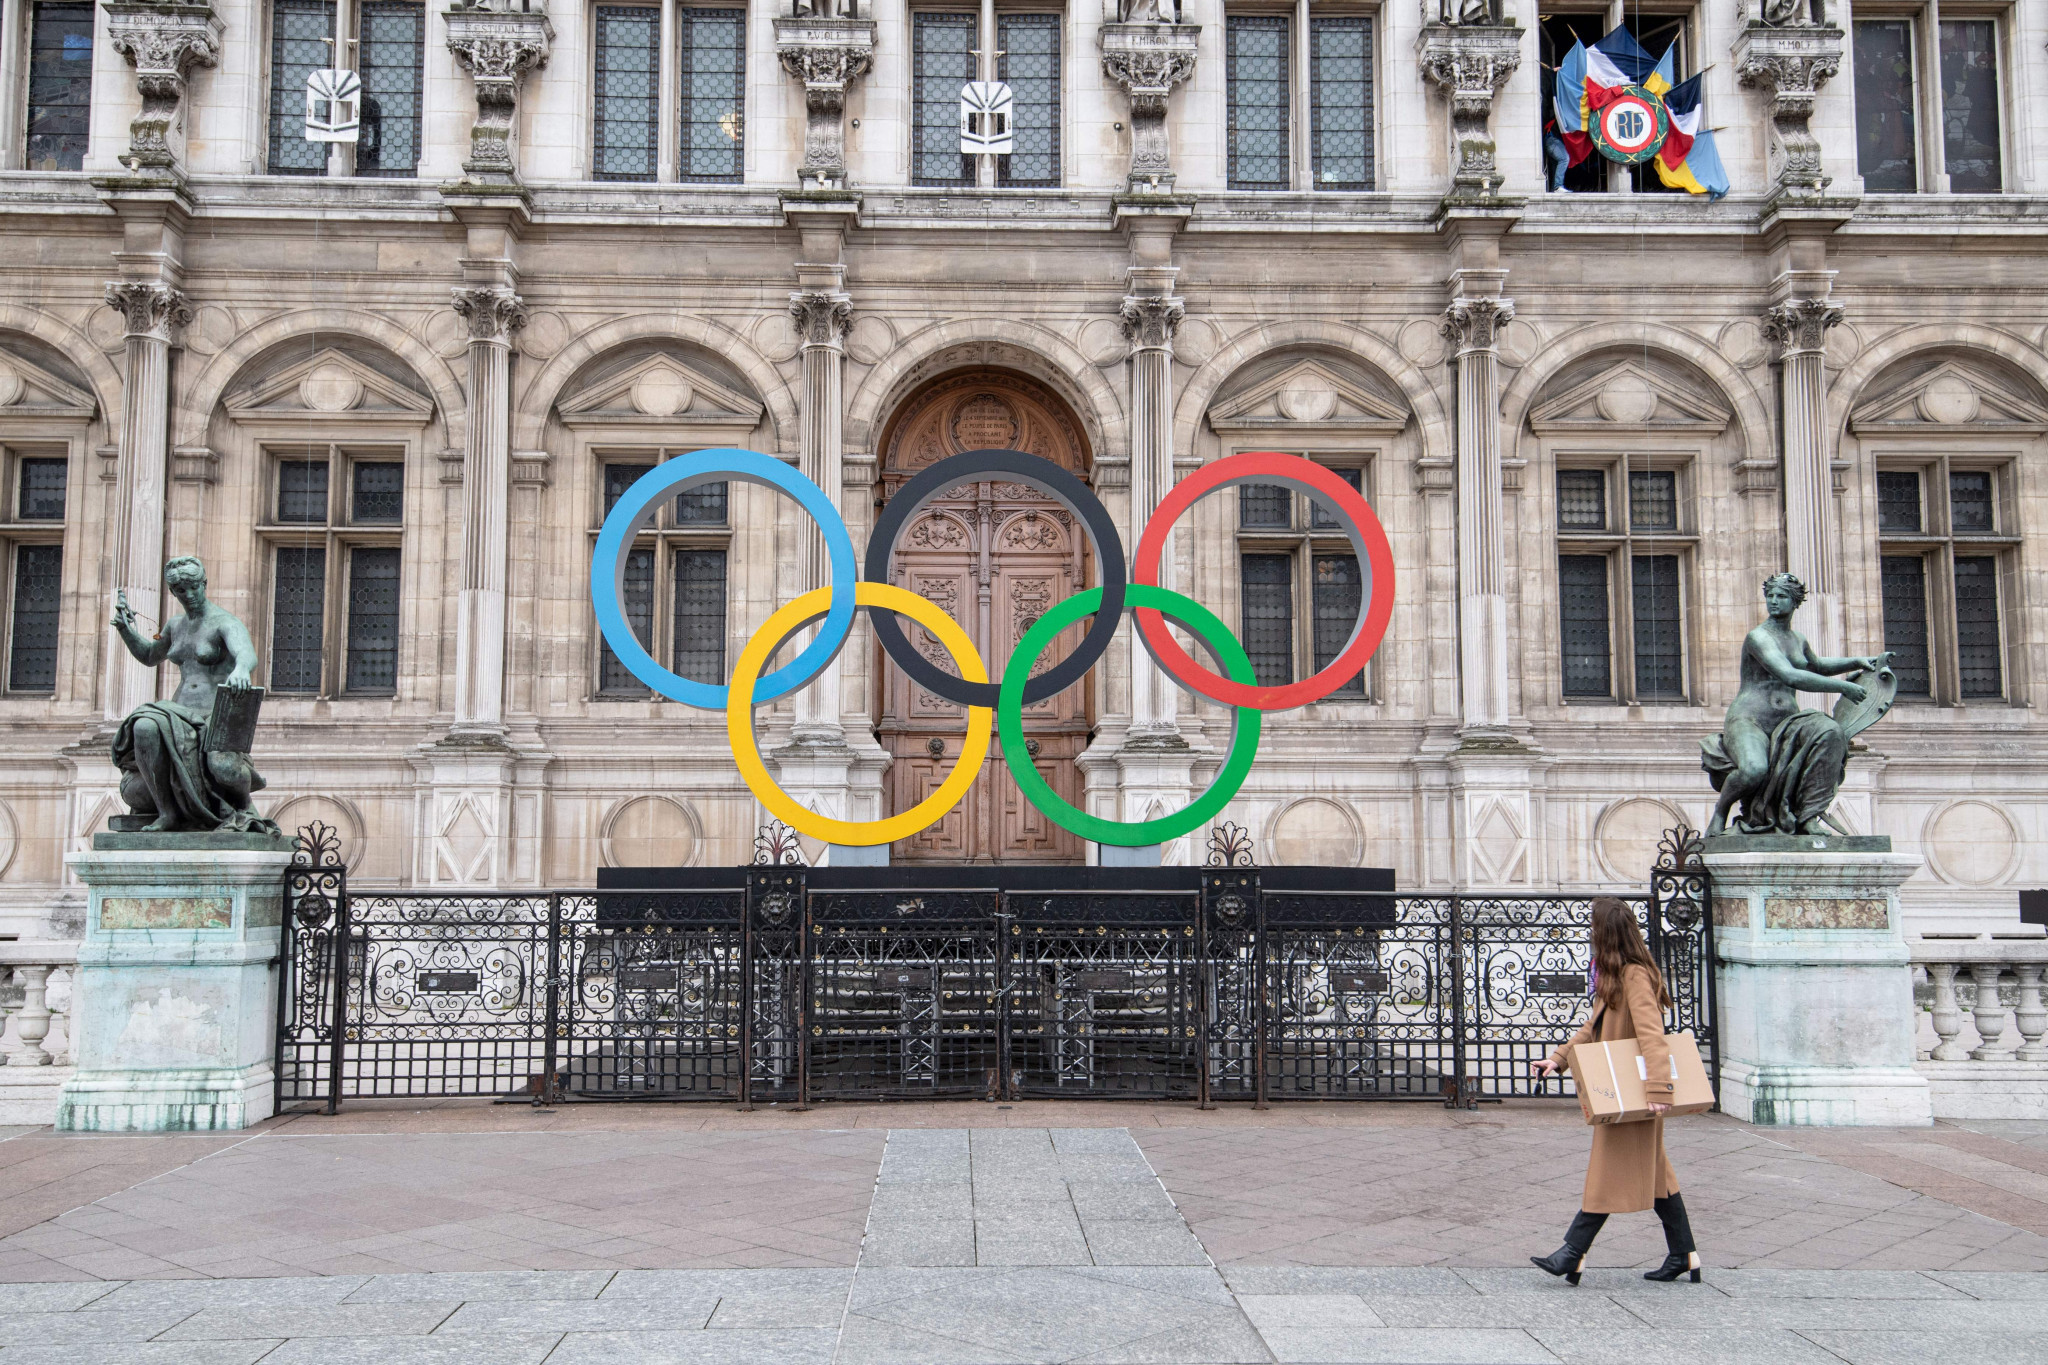 More than half of French people cannot wait to attend Paris 2024 Olympics according to IPSOS survey 